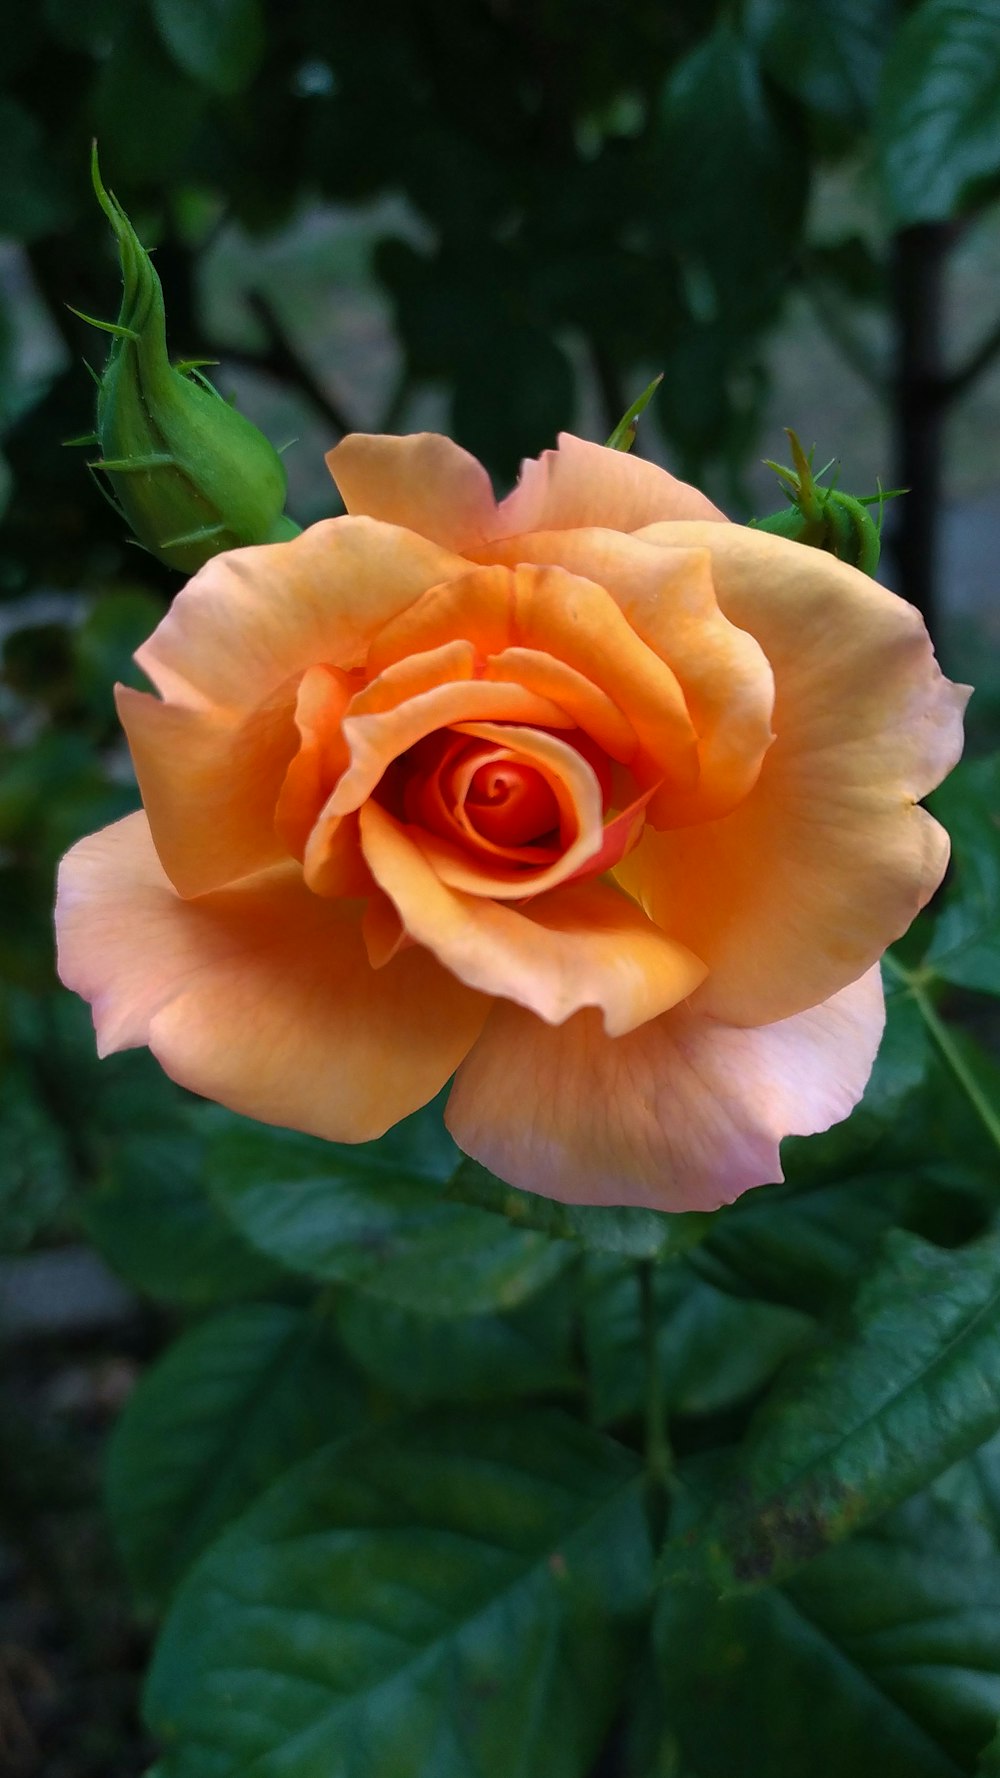 a yellow rose with green leaves in the background